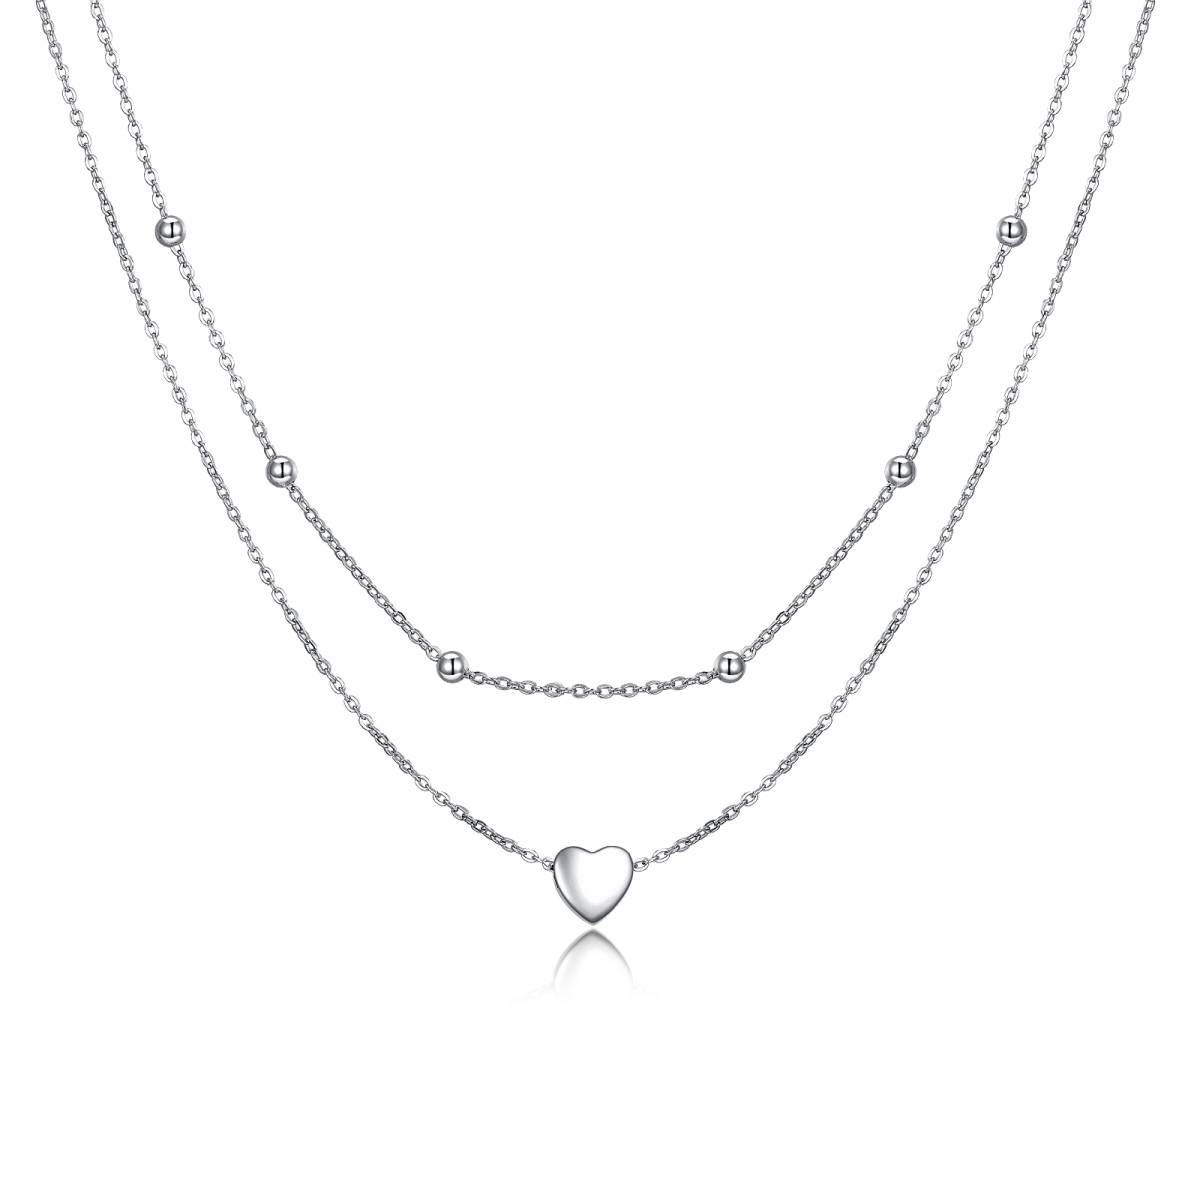 Sterling Silver Heart Bead 2 Layered Necklace with Bead Station Chain-1